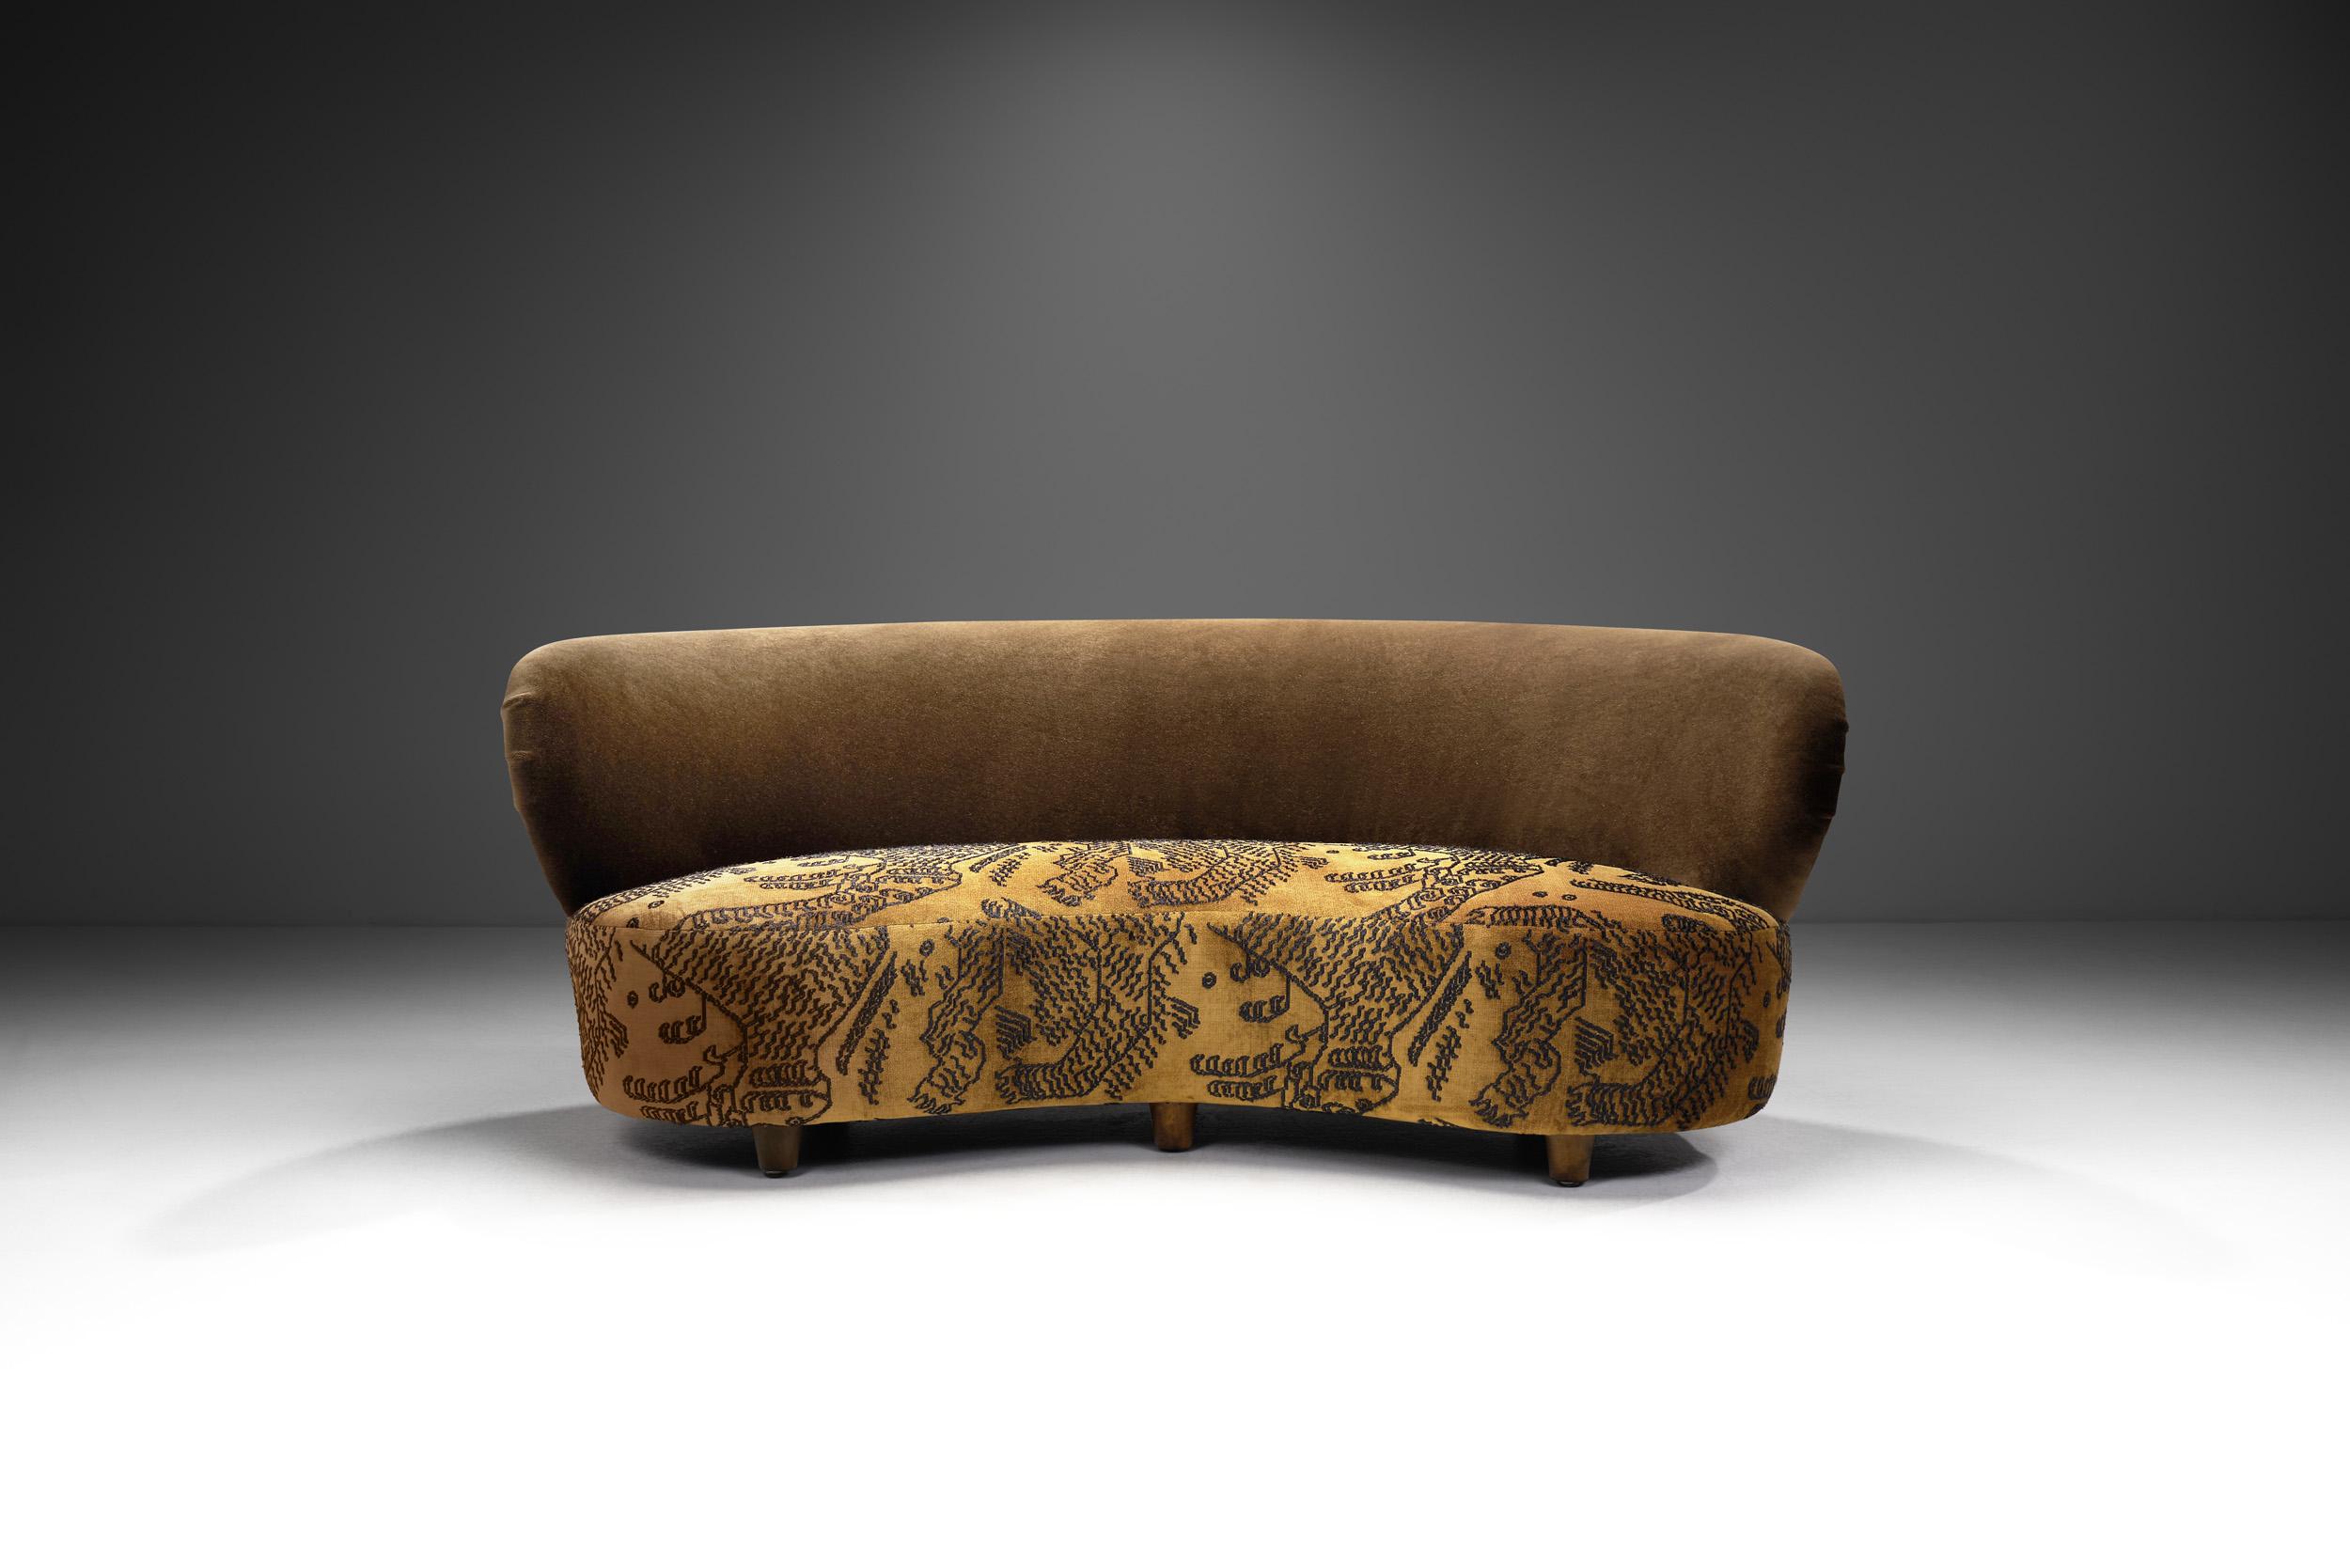 Art Deco Mid-Century Modern Three-Seater Sofa in a Patterned Fabric, Scandinavia 1950s For Sale